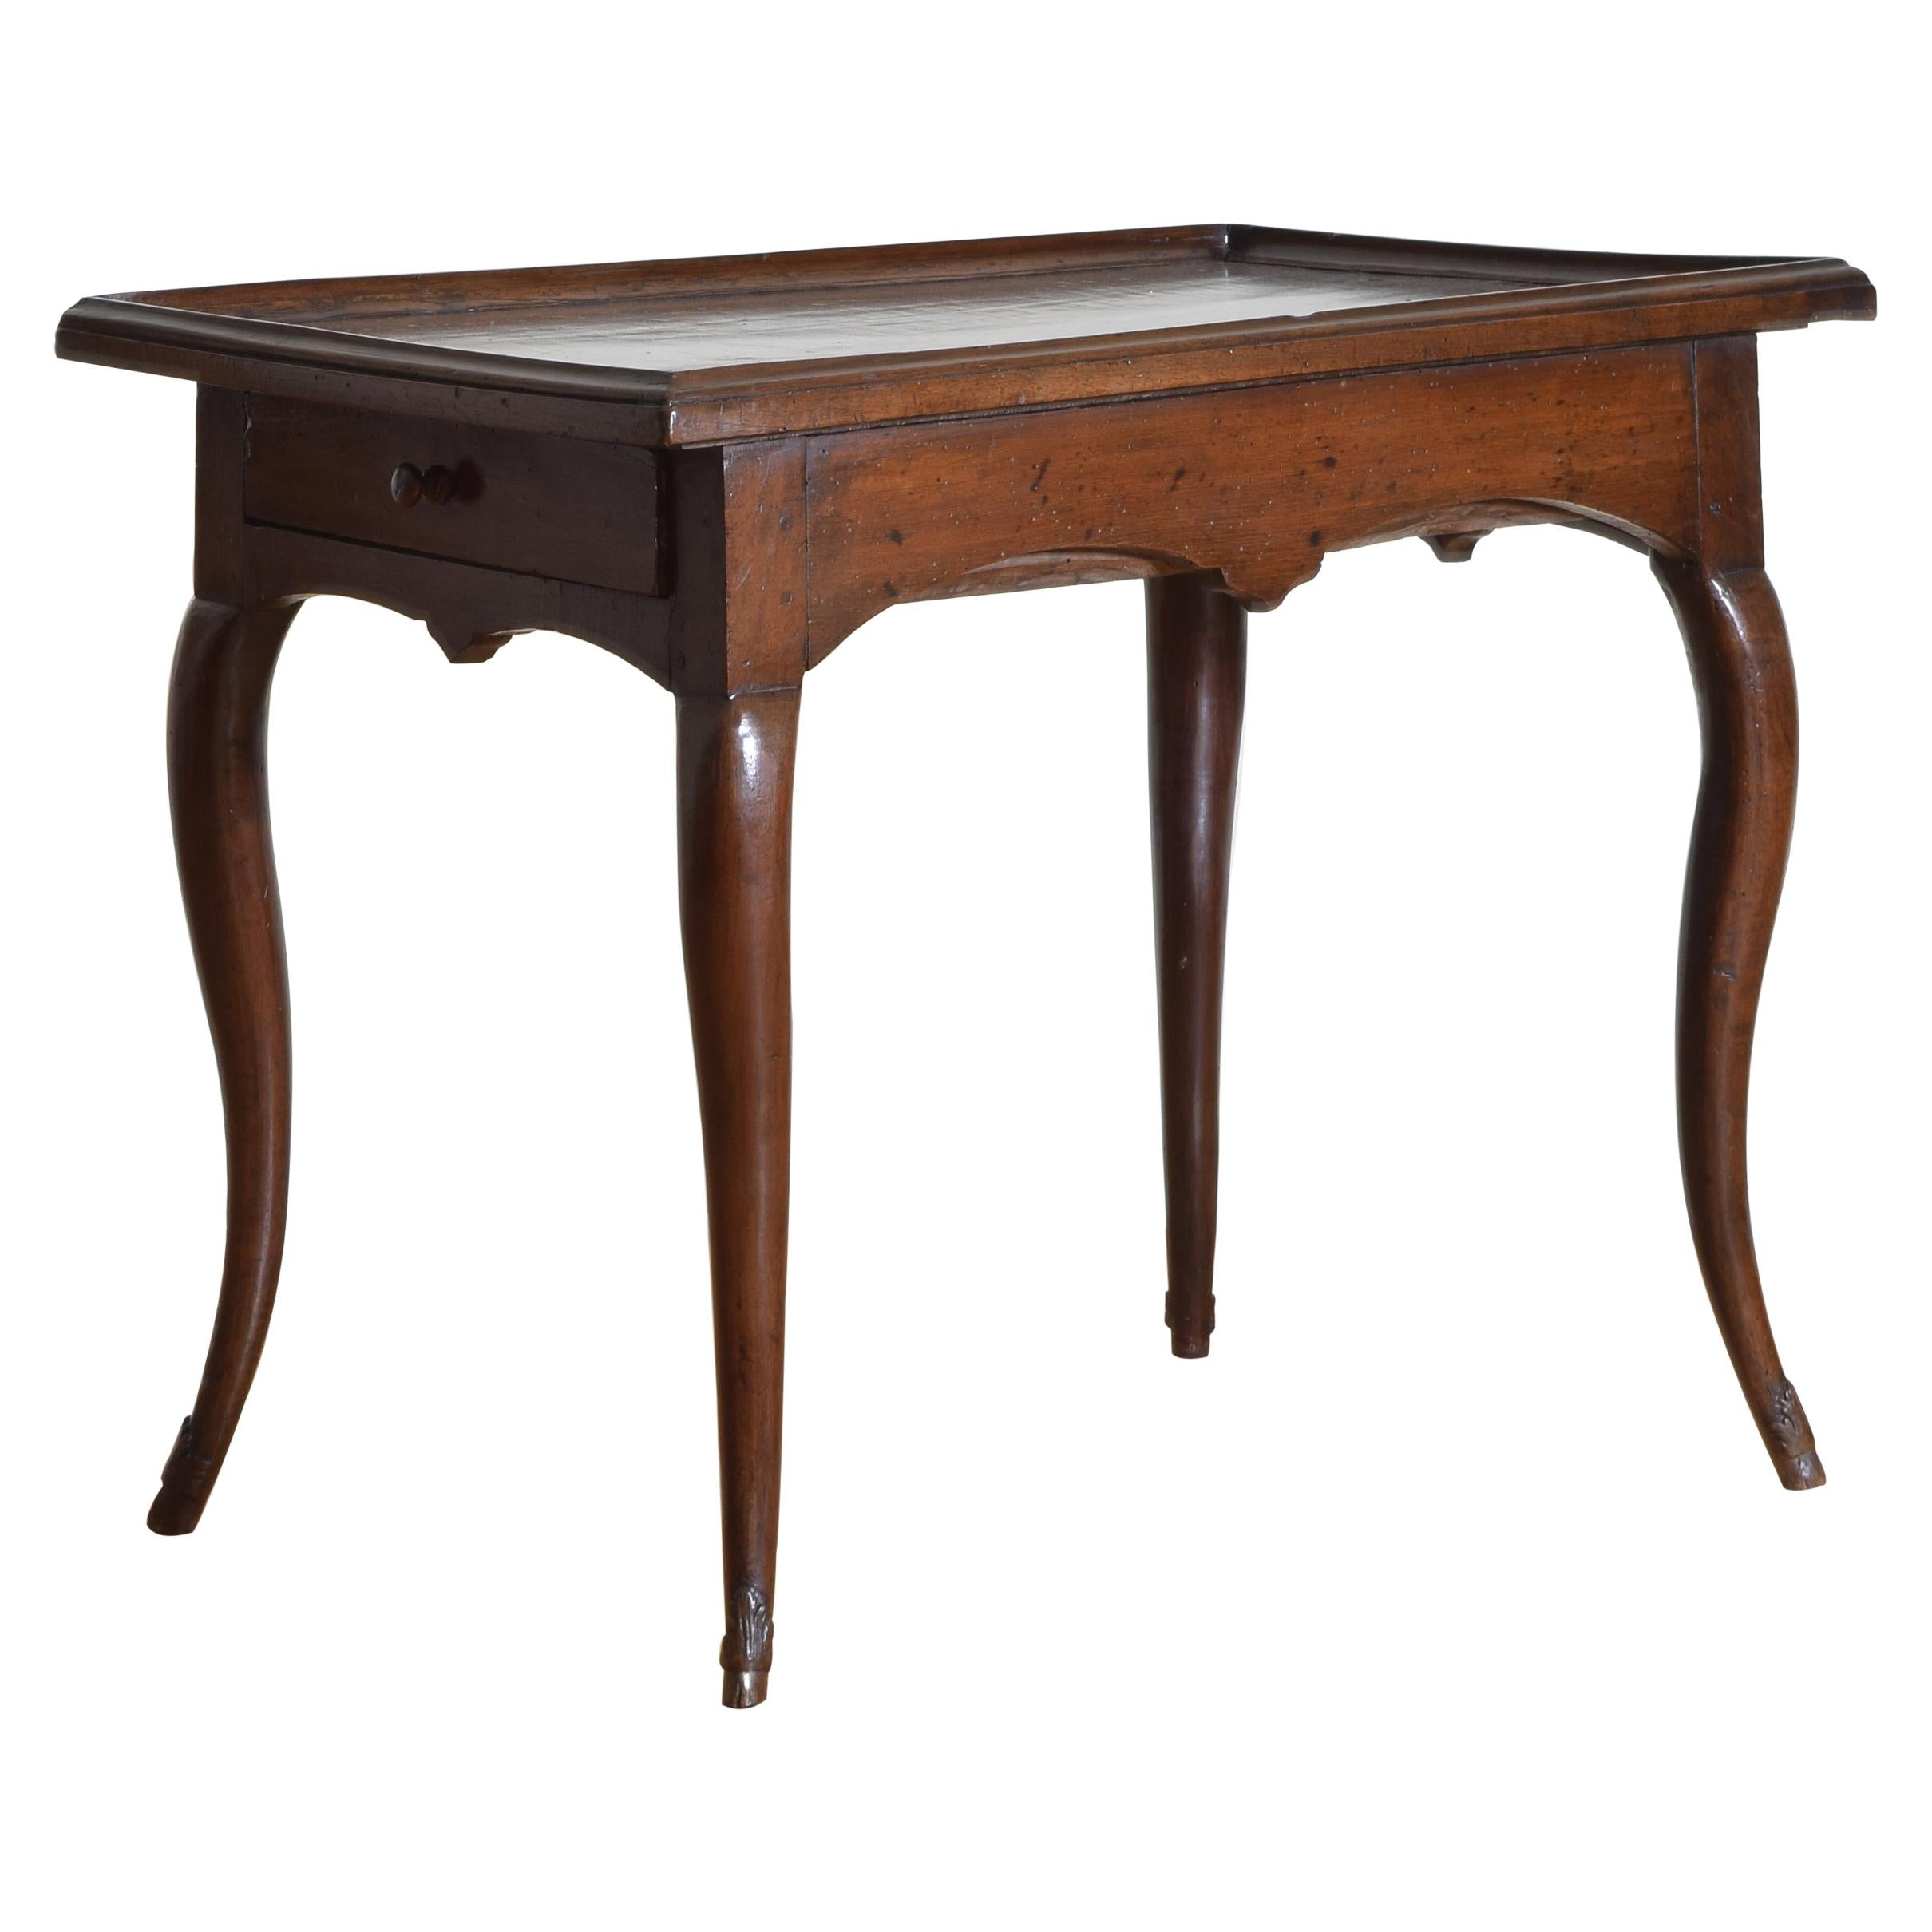 French Louis XV Period Walnut 2-Drawer Gallery Top Table, Mid-18th Century